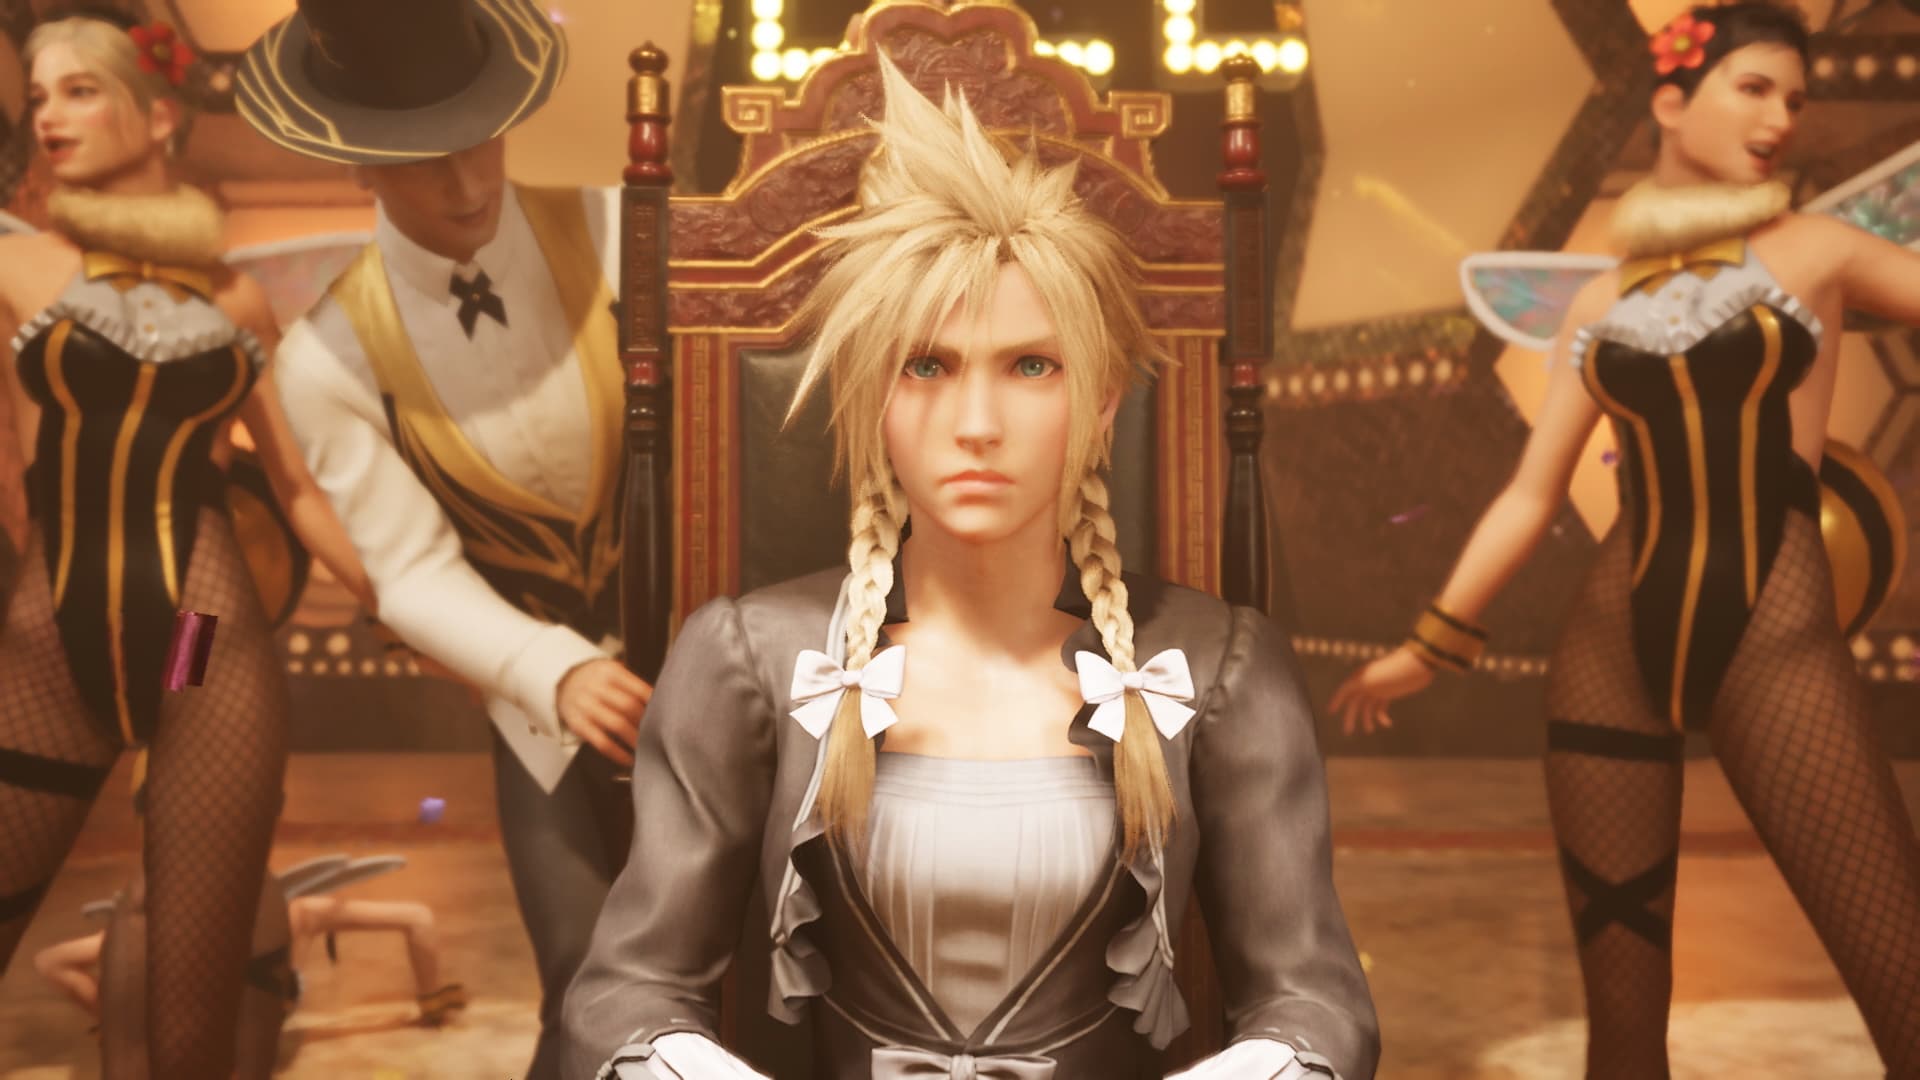 Final Fantasy 7 Remake: Dressed to the Nines Trophy Guide